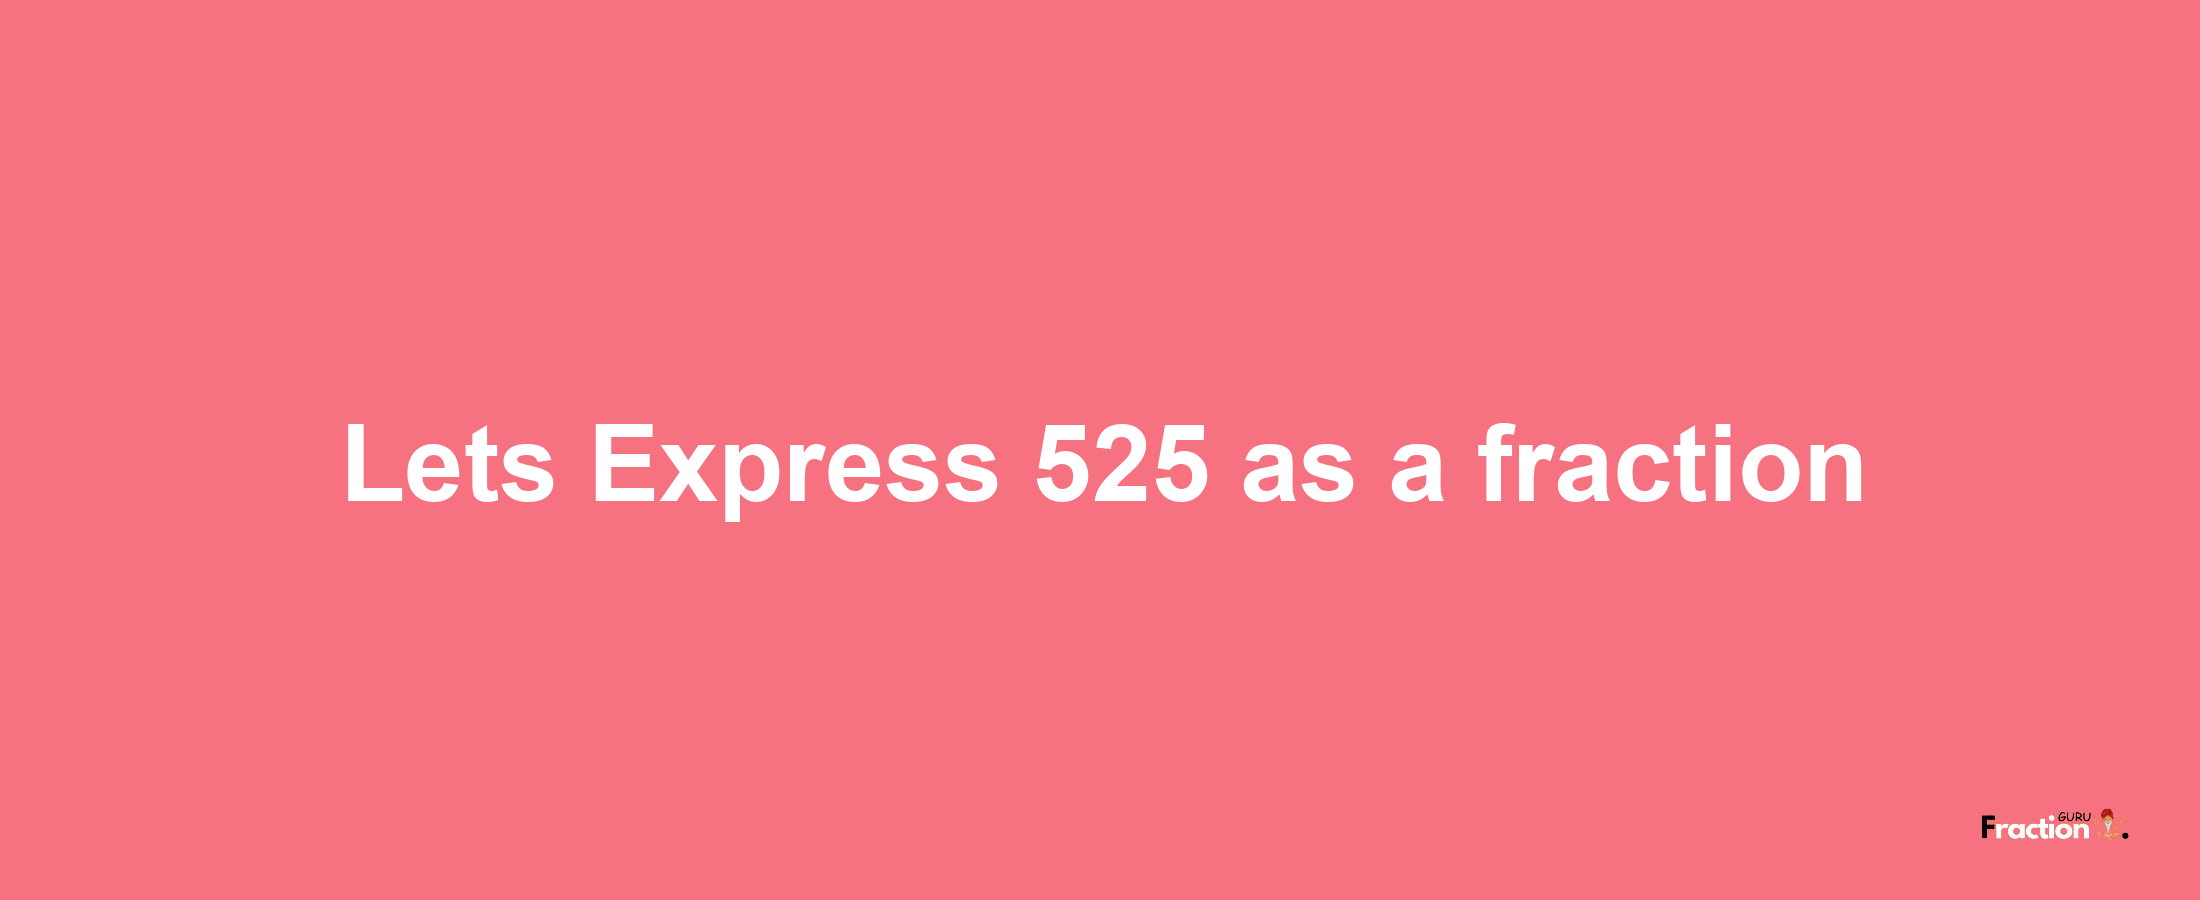 Lets Express 525 as afraction